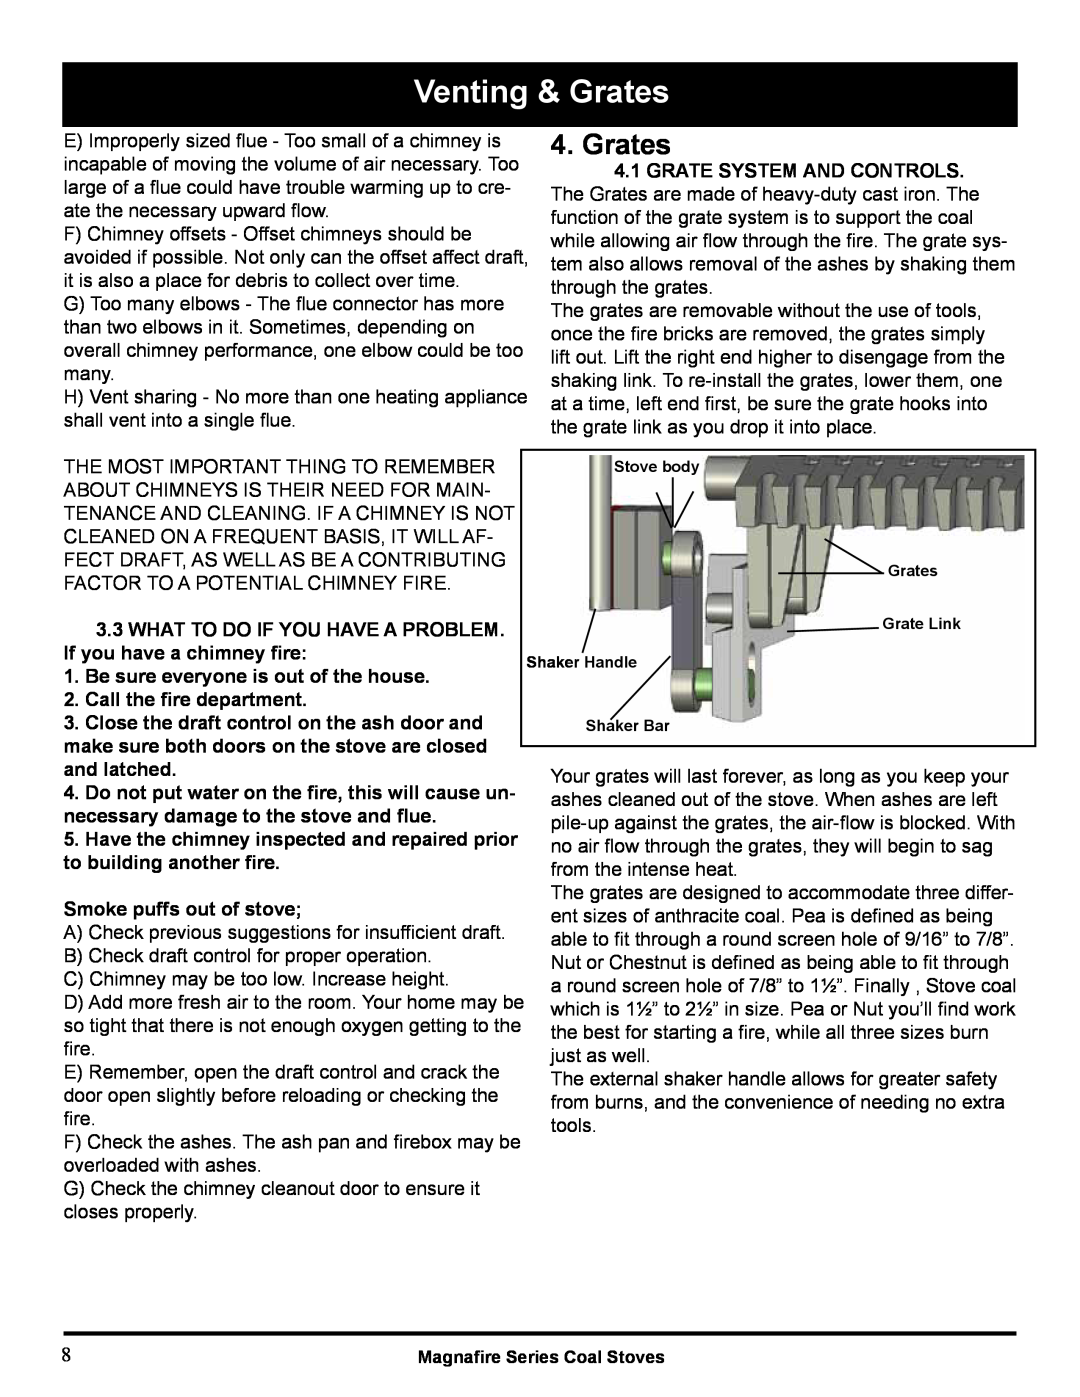 Harman Stove Company MARK III Venting & Grates, Grate System And Controls, what to do if you have a problem, and latched 